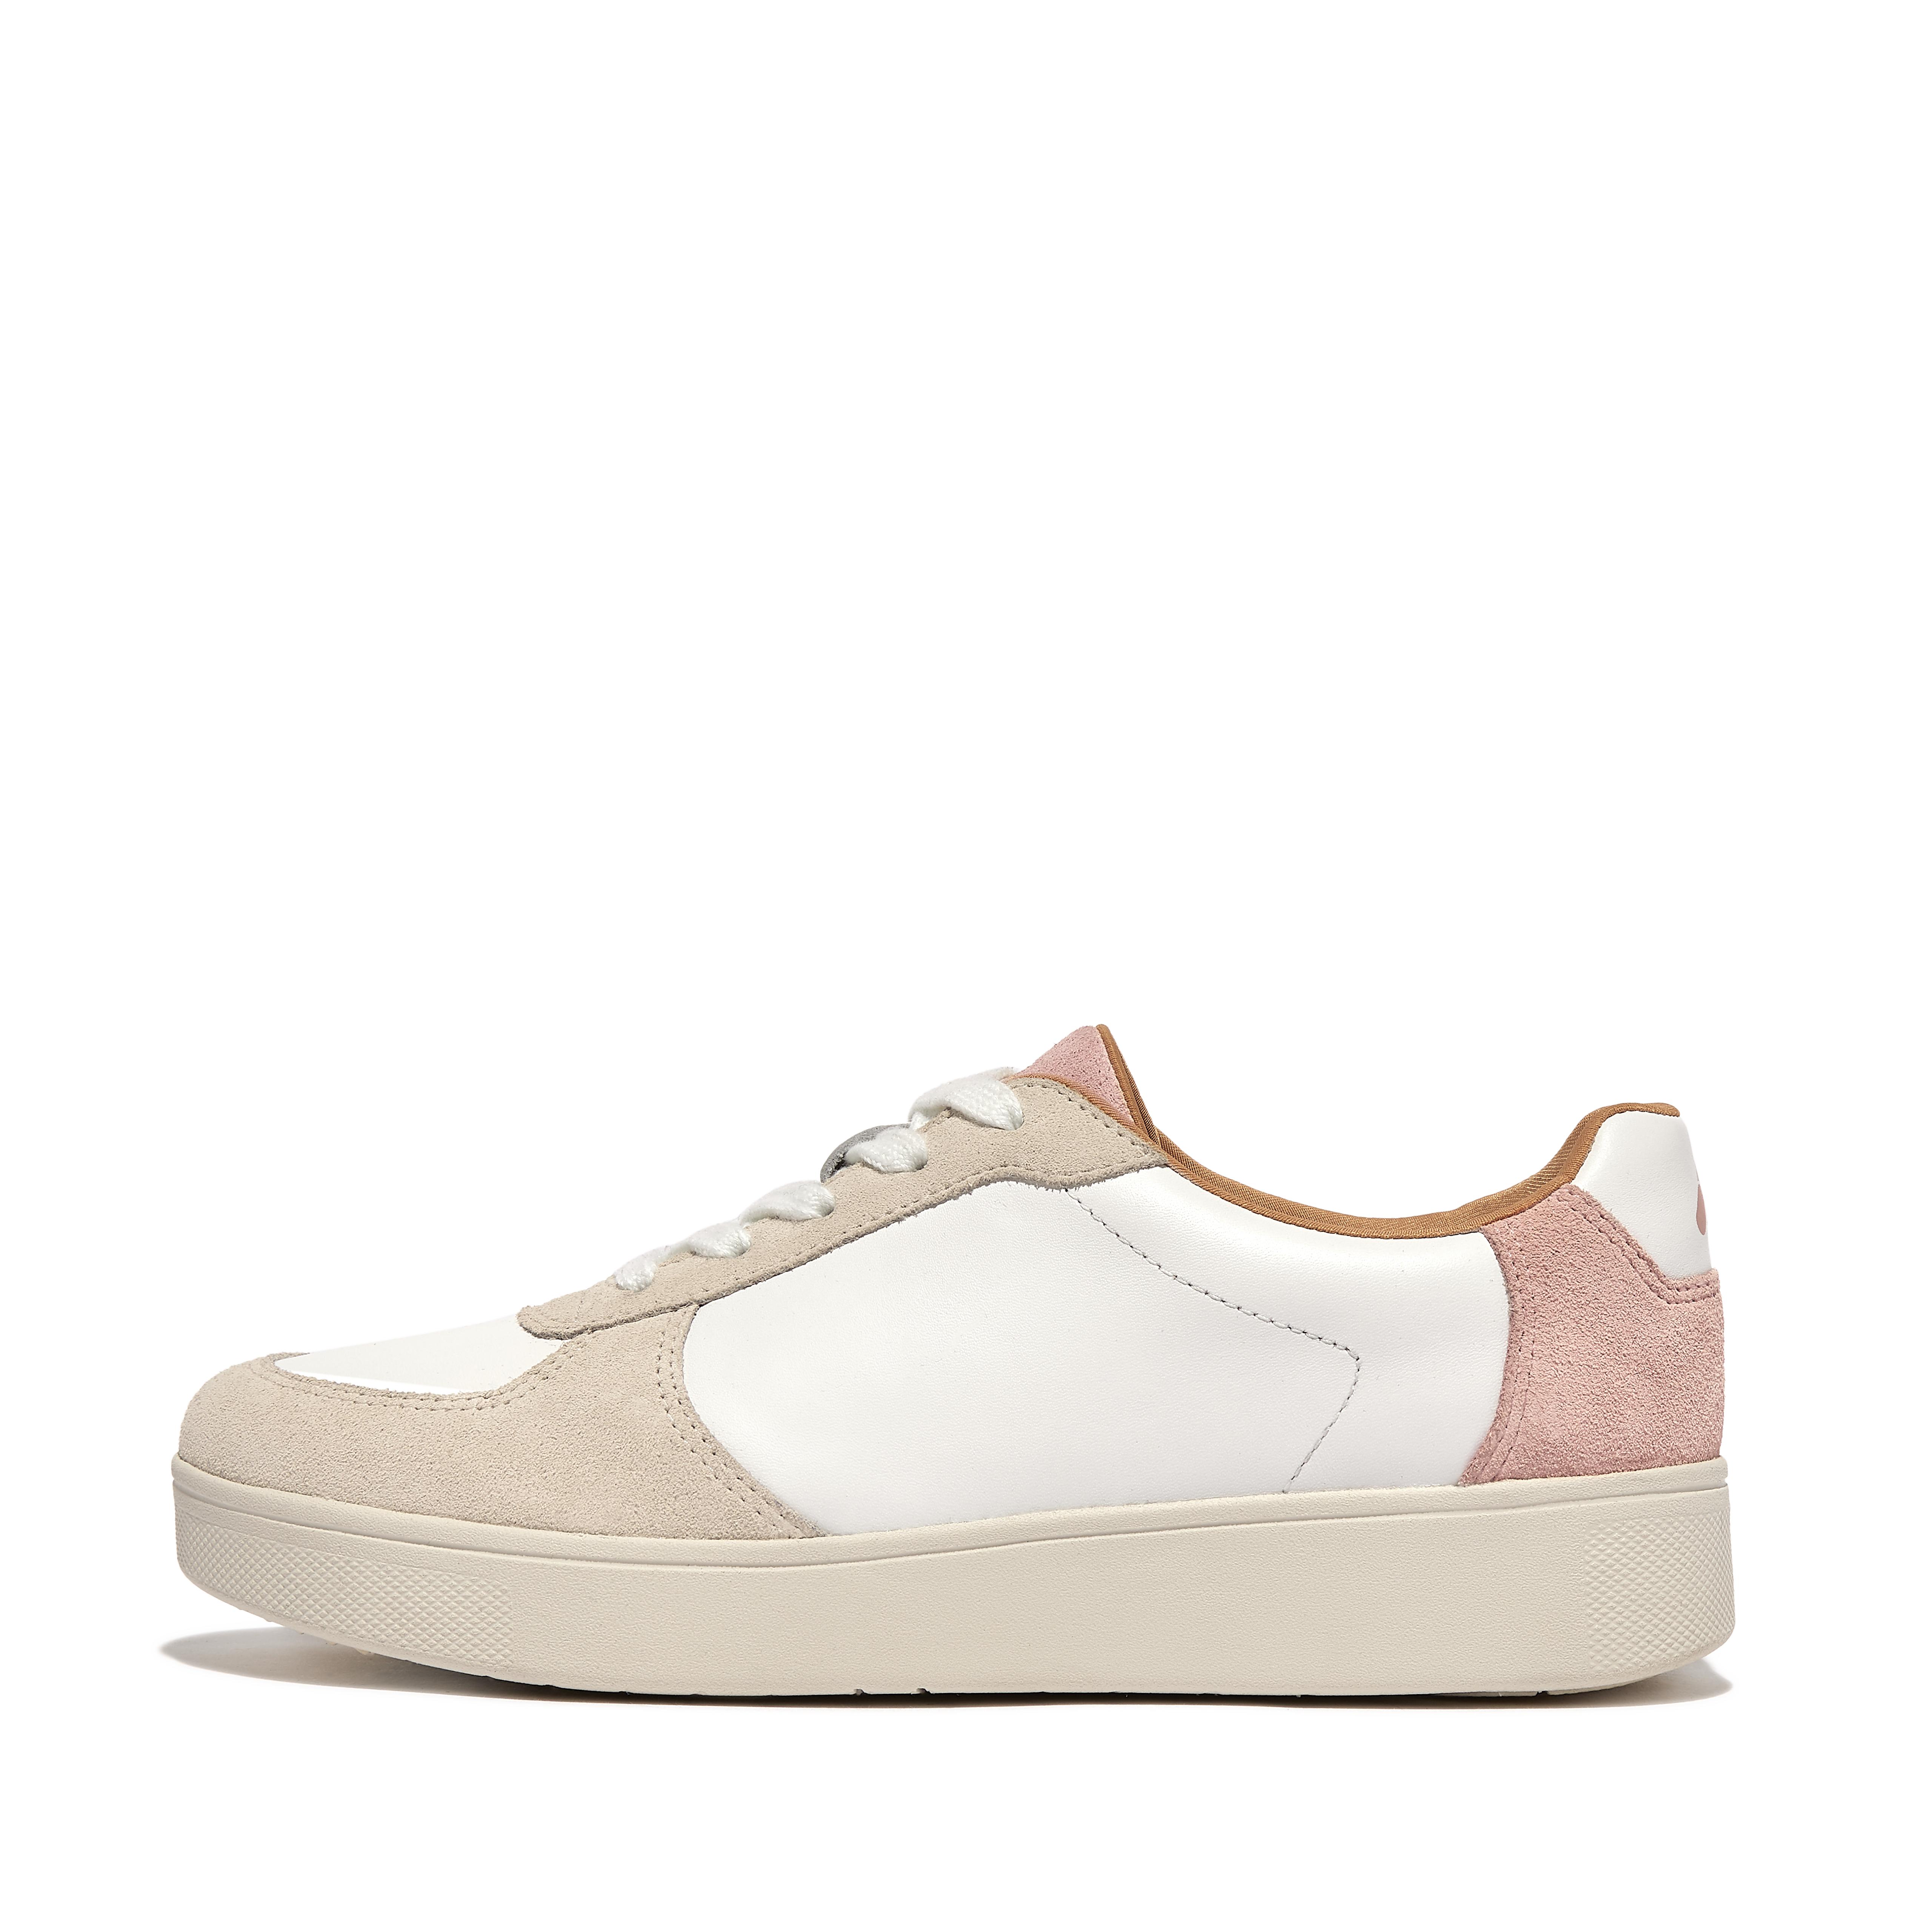 Women's Rally Suede-Leather Sneakers | FitFlop US